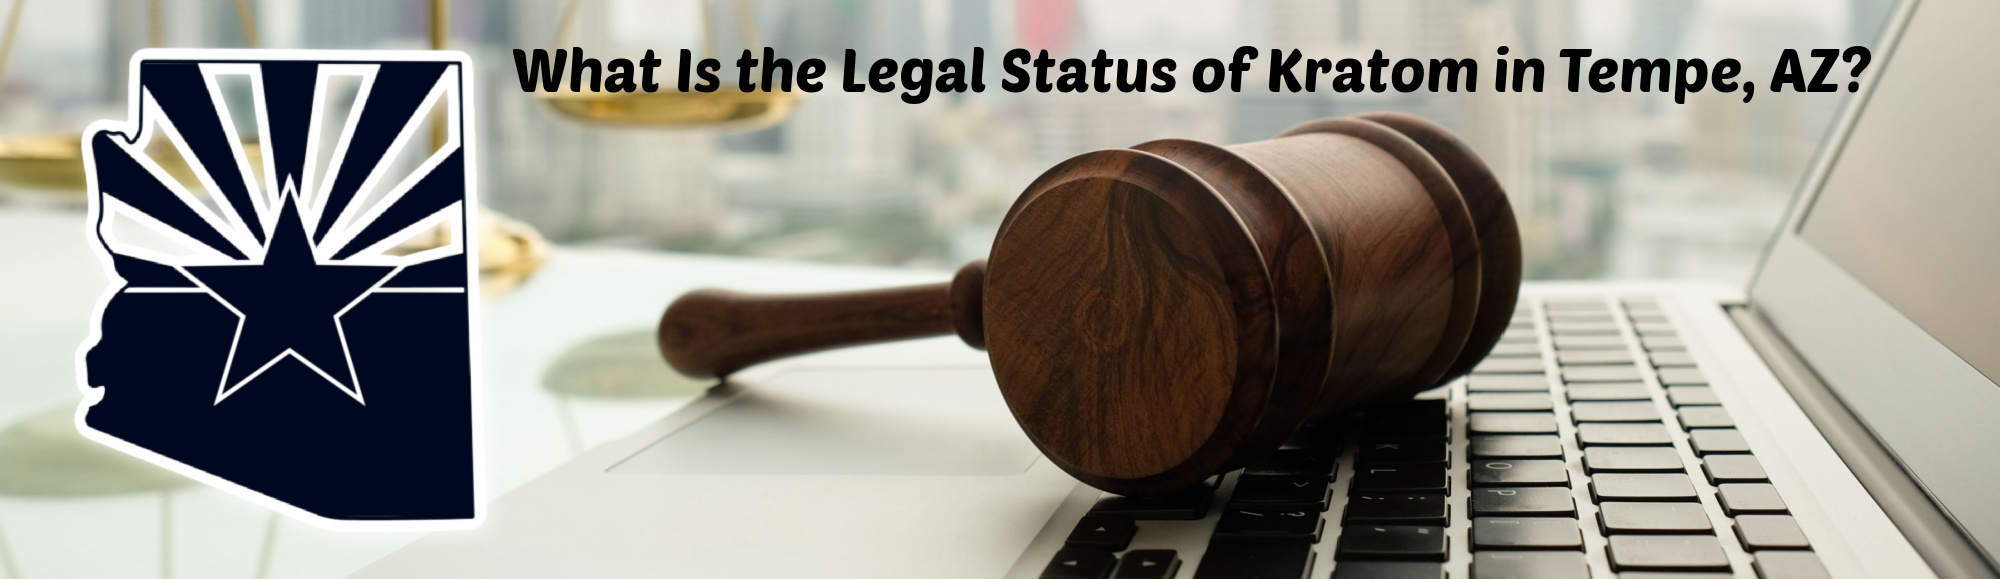 image of what is the legal status of kratom in tampa az